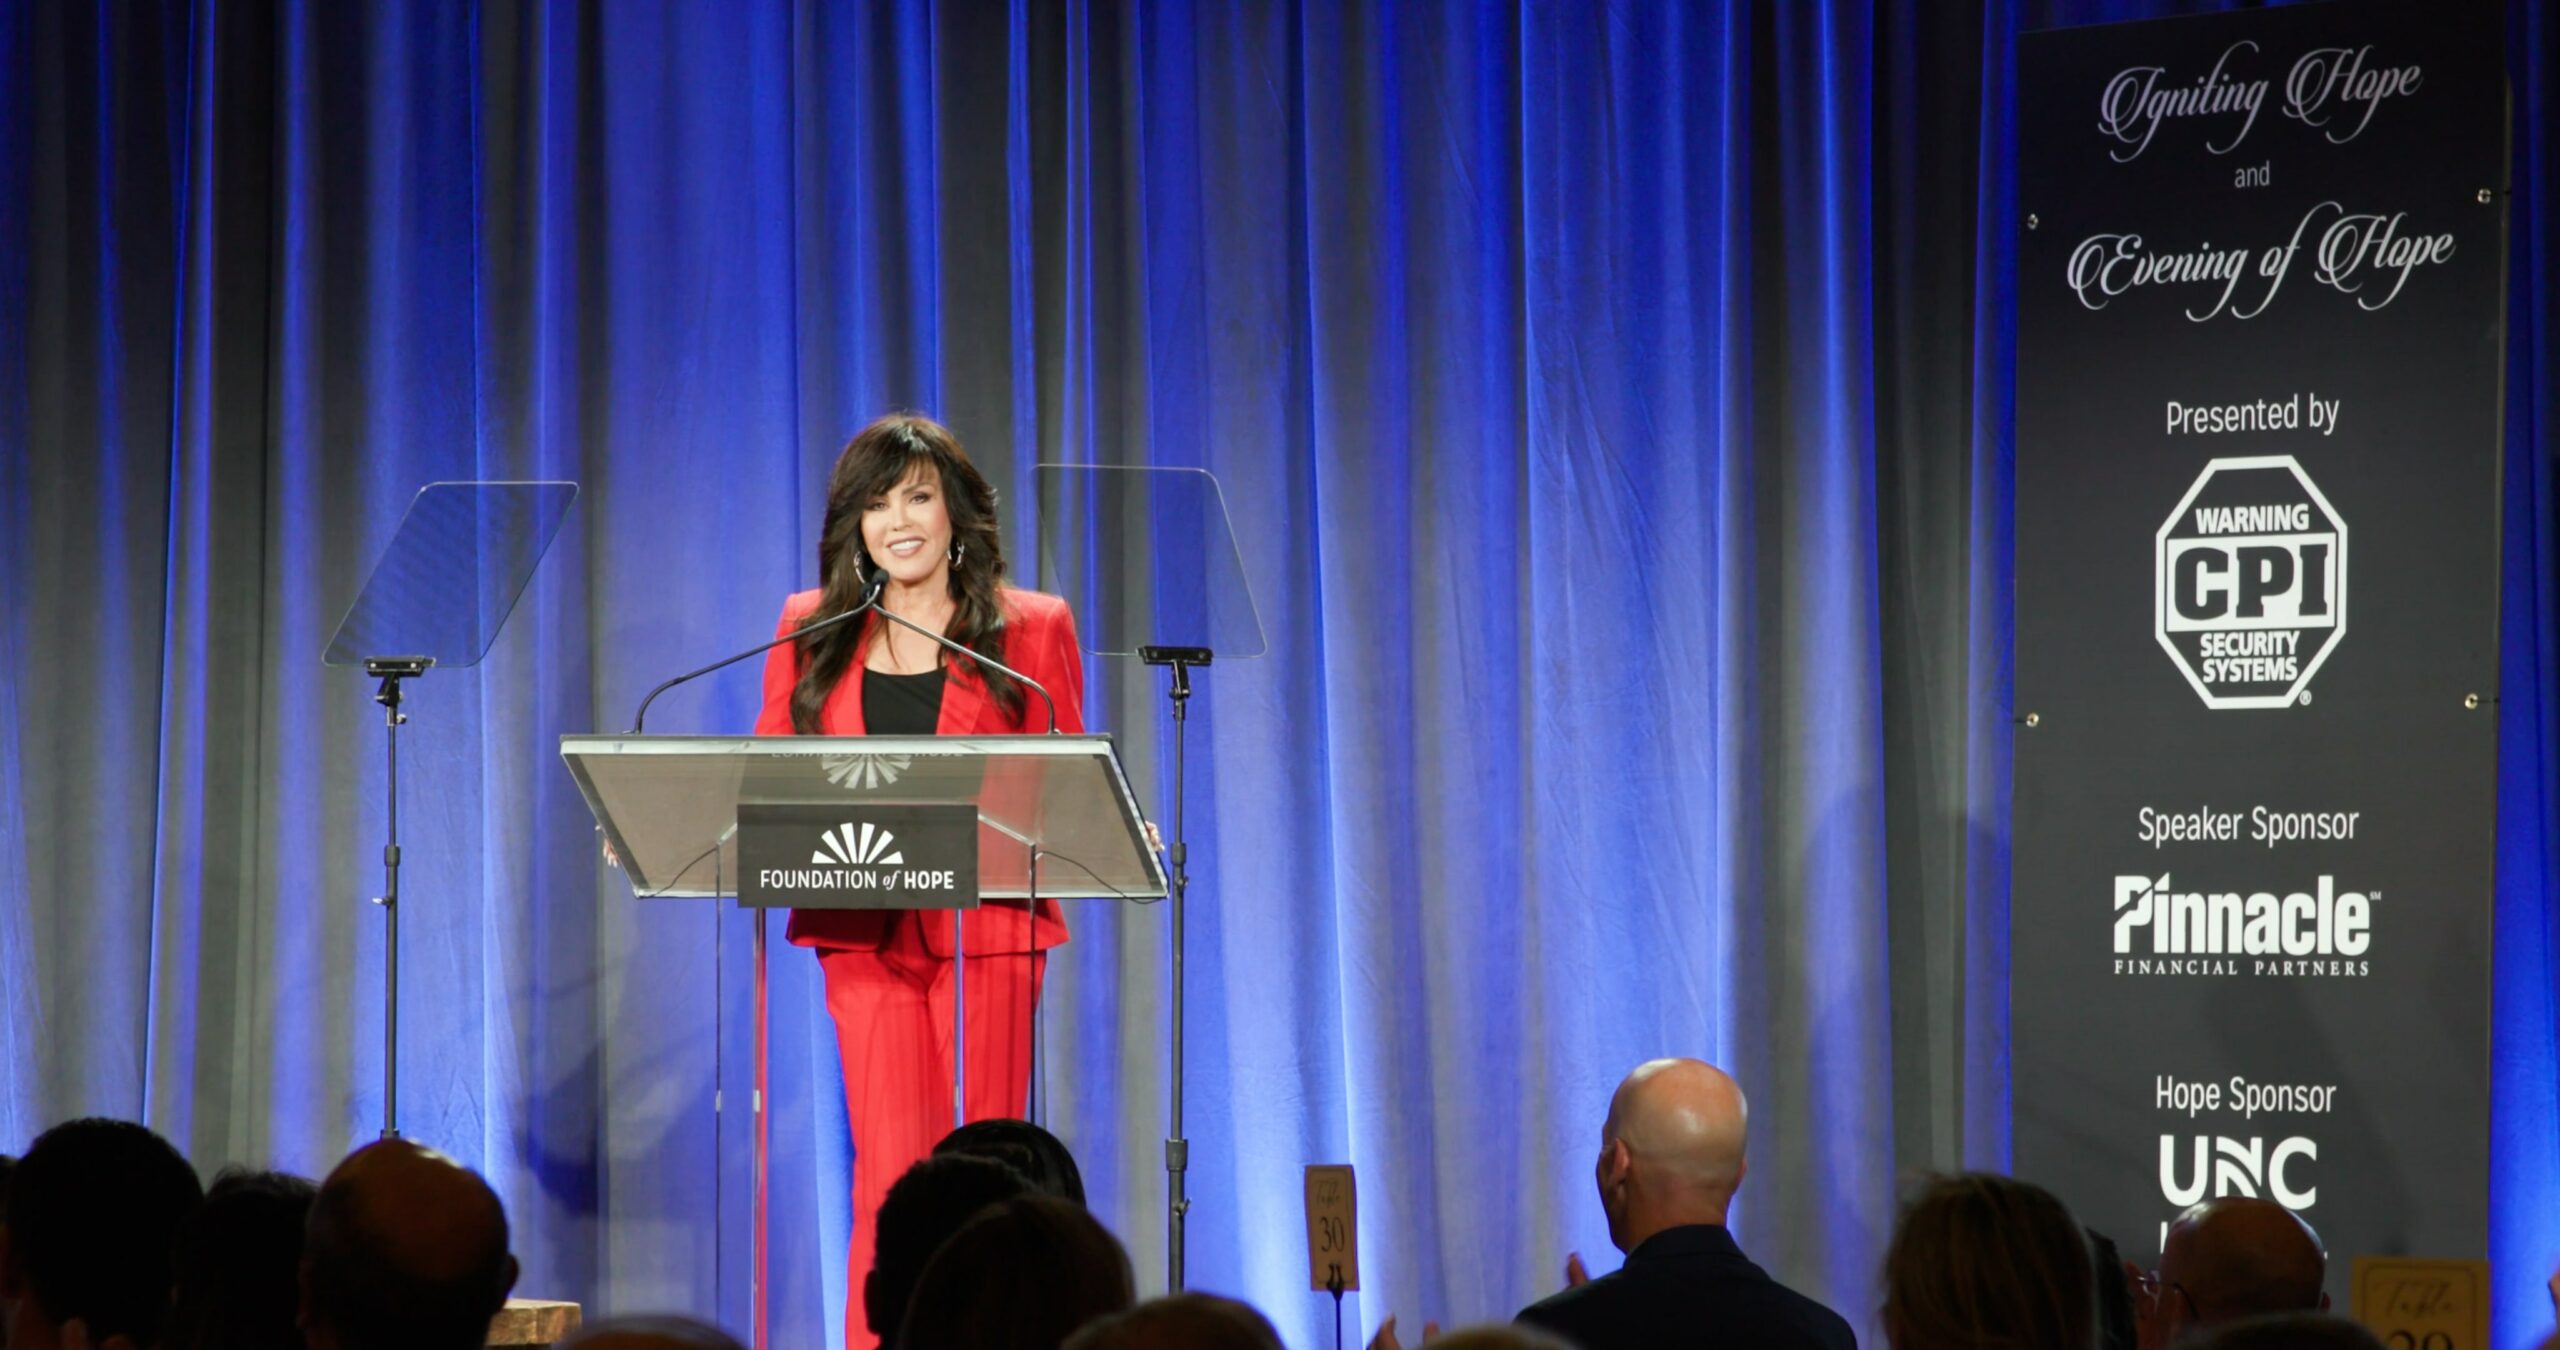 Marie Osmond at Evening of Hope